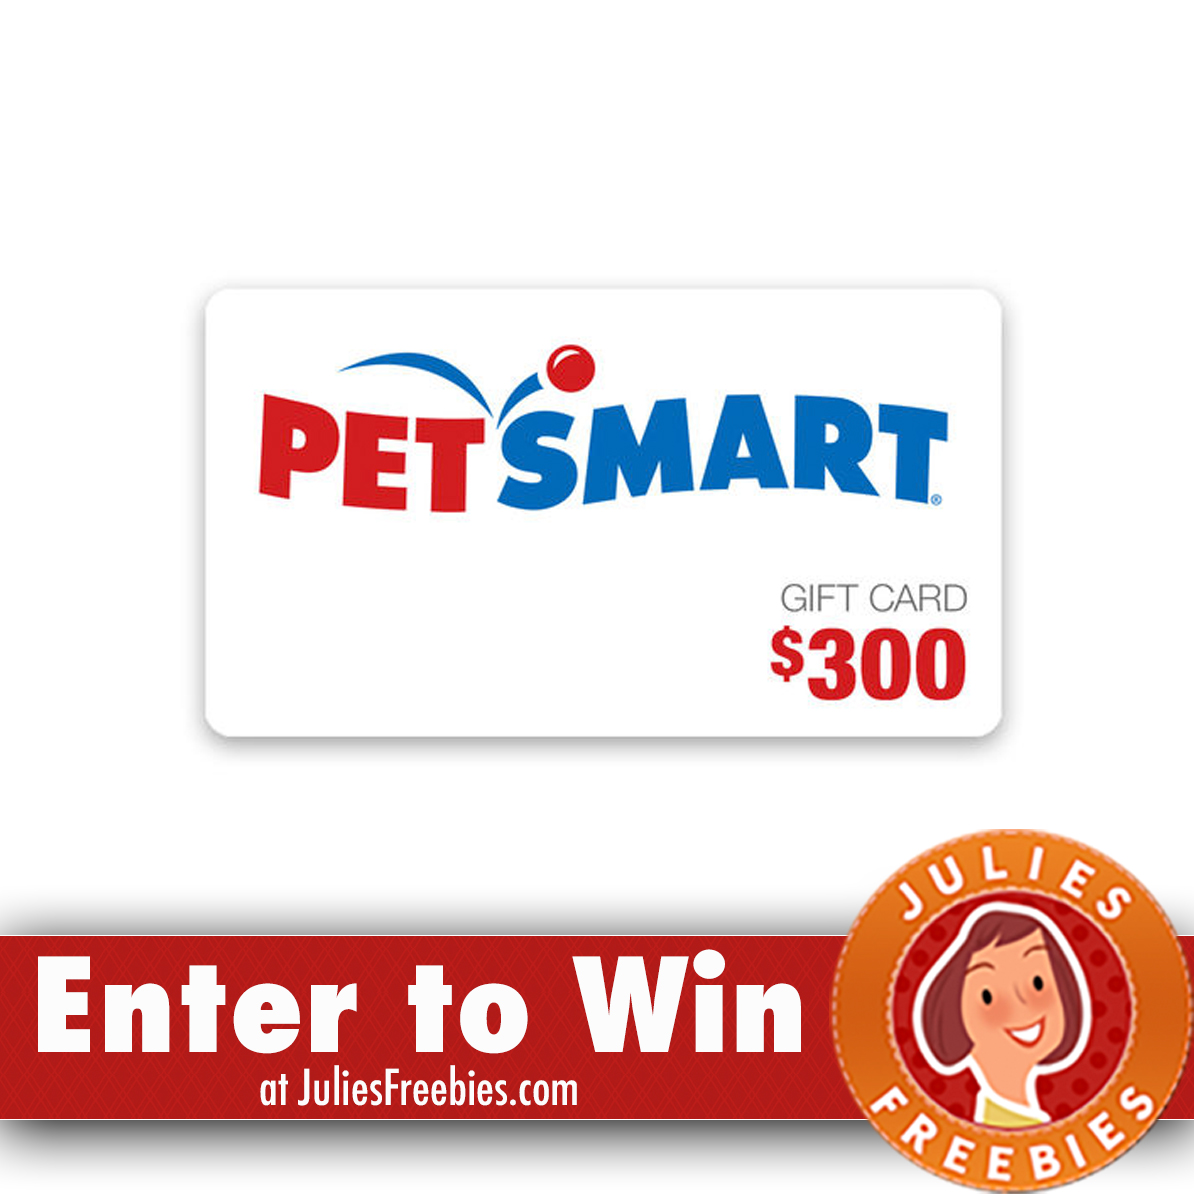 Here Is An Offer Where You Can Enter To Win A Pet Smart Gift Card From Ellen